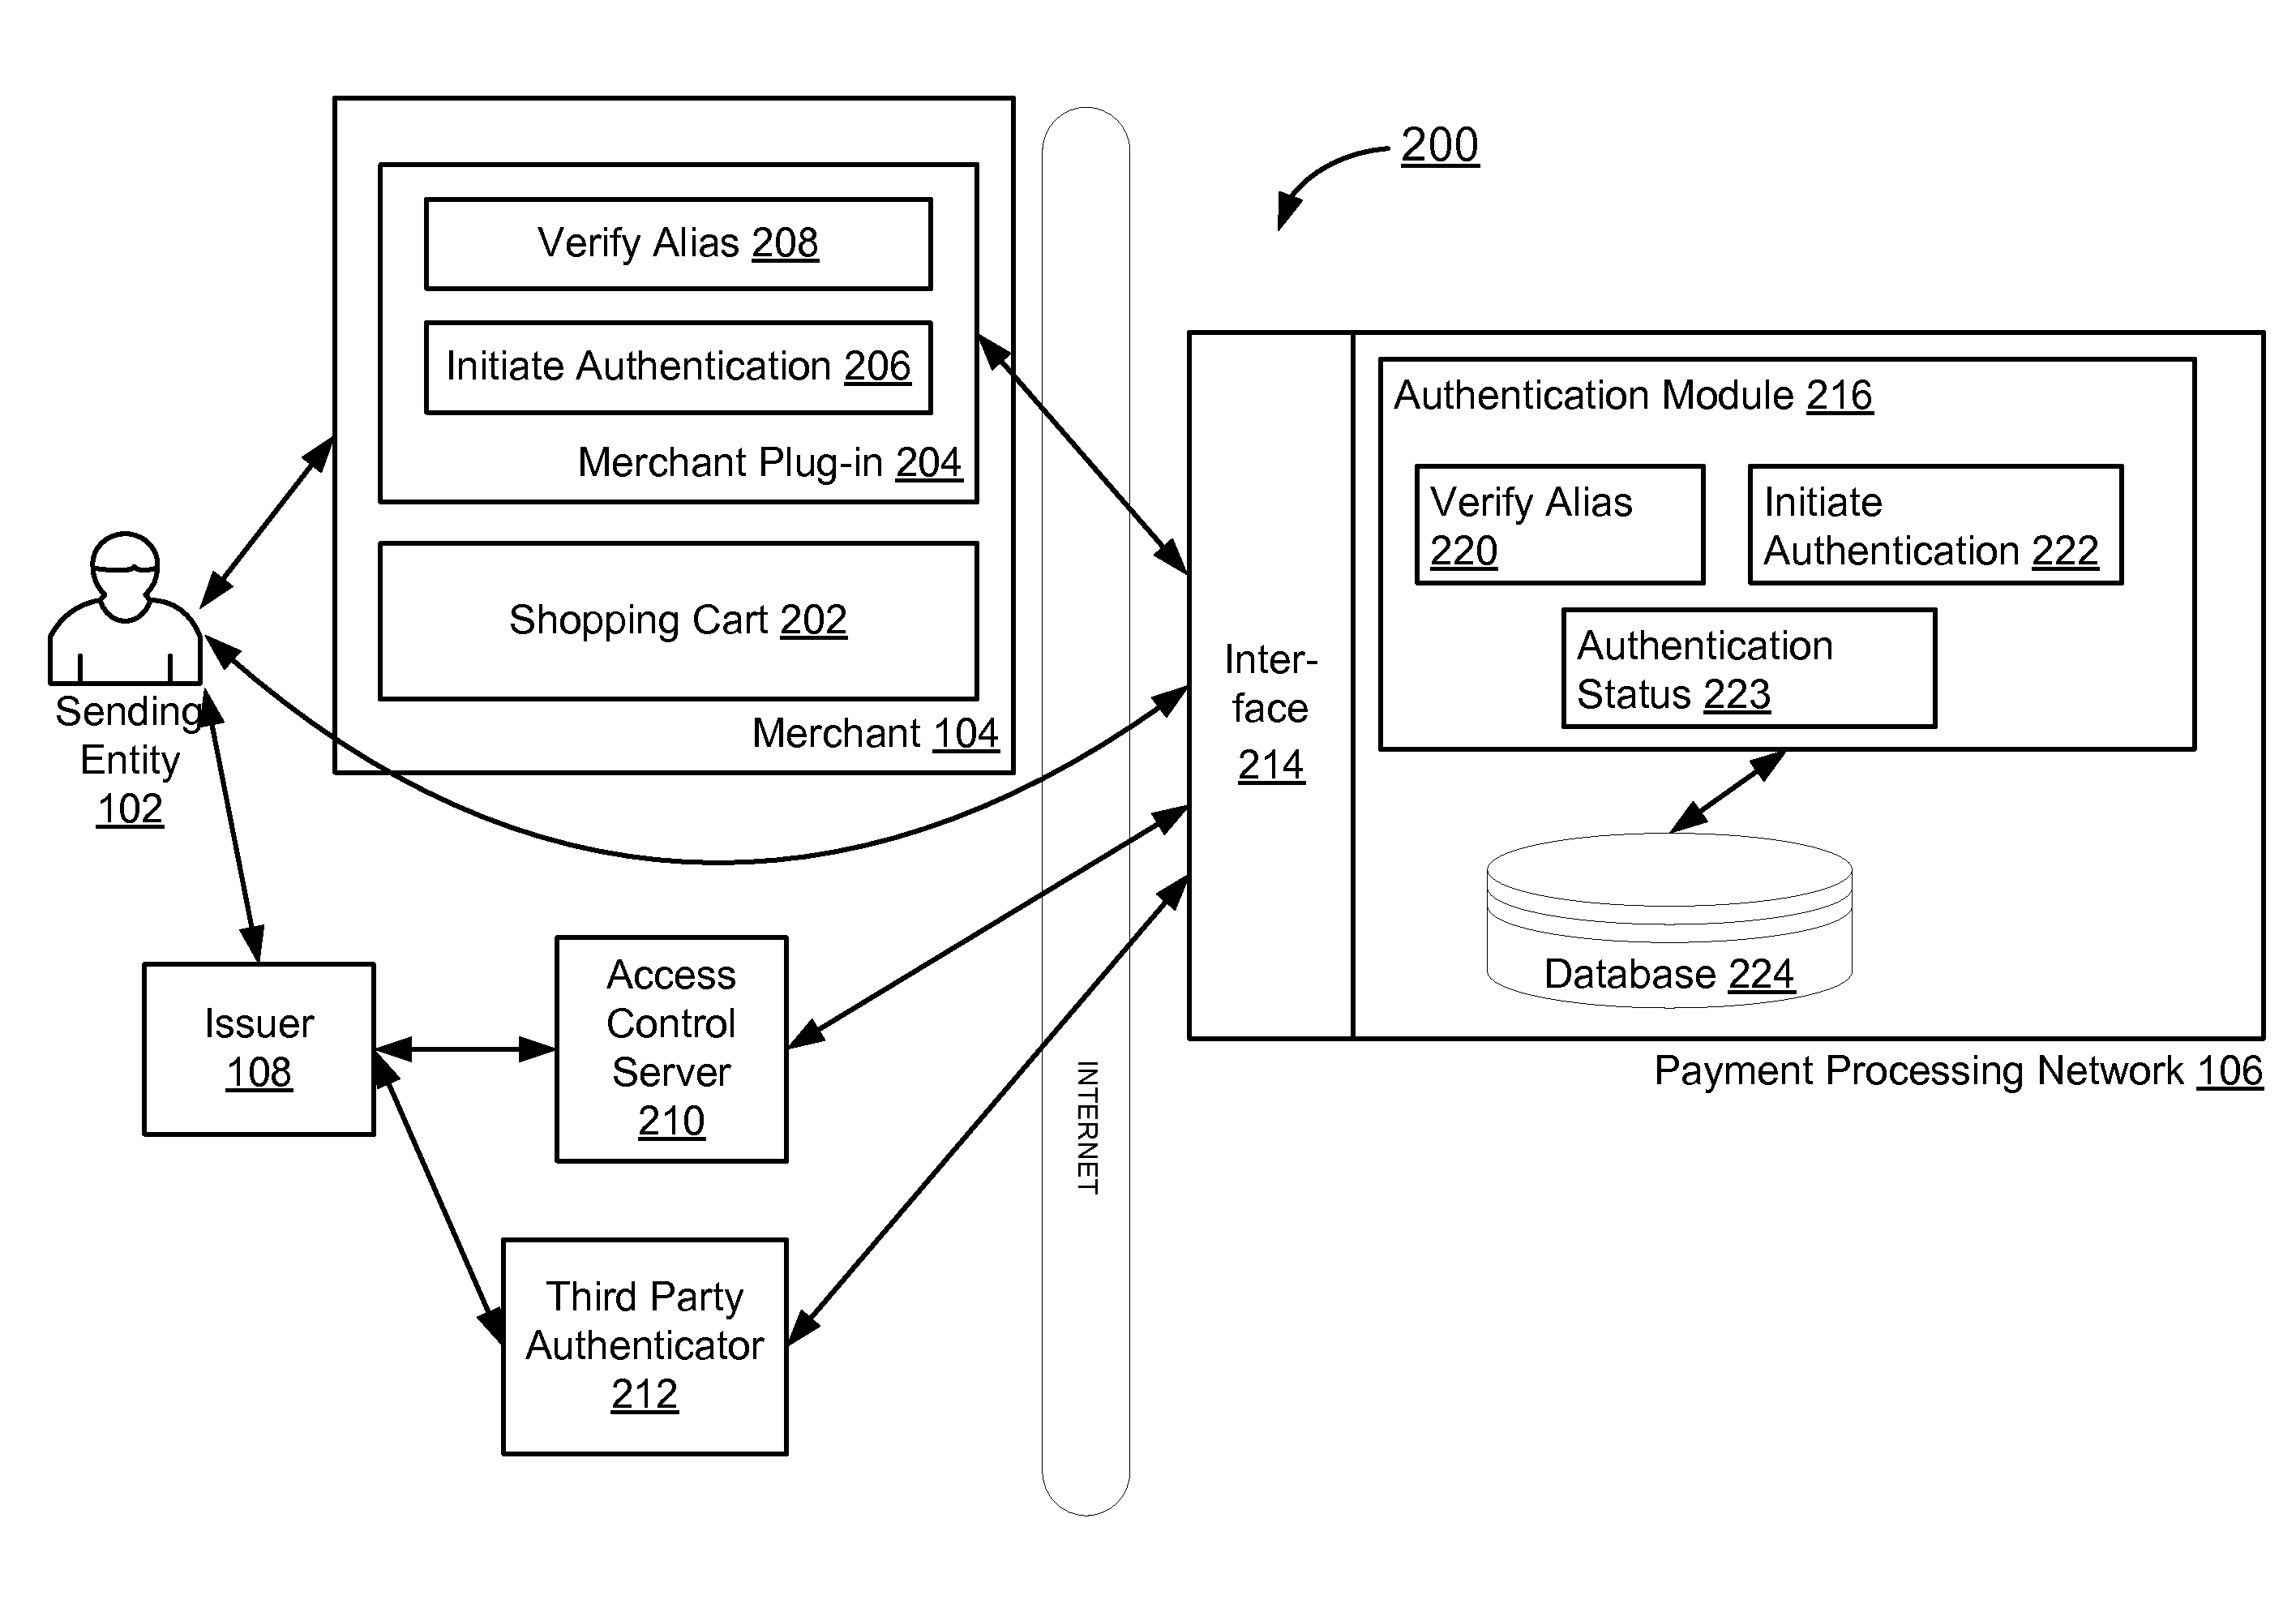 Remote Variable Authentication Processing